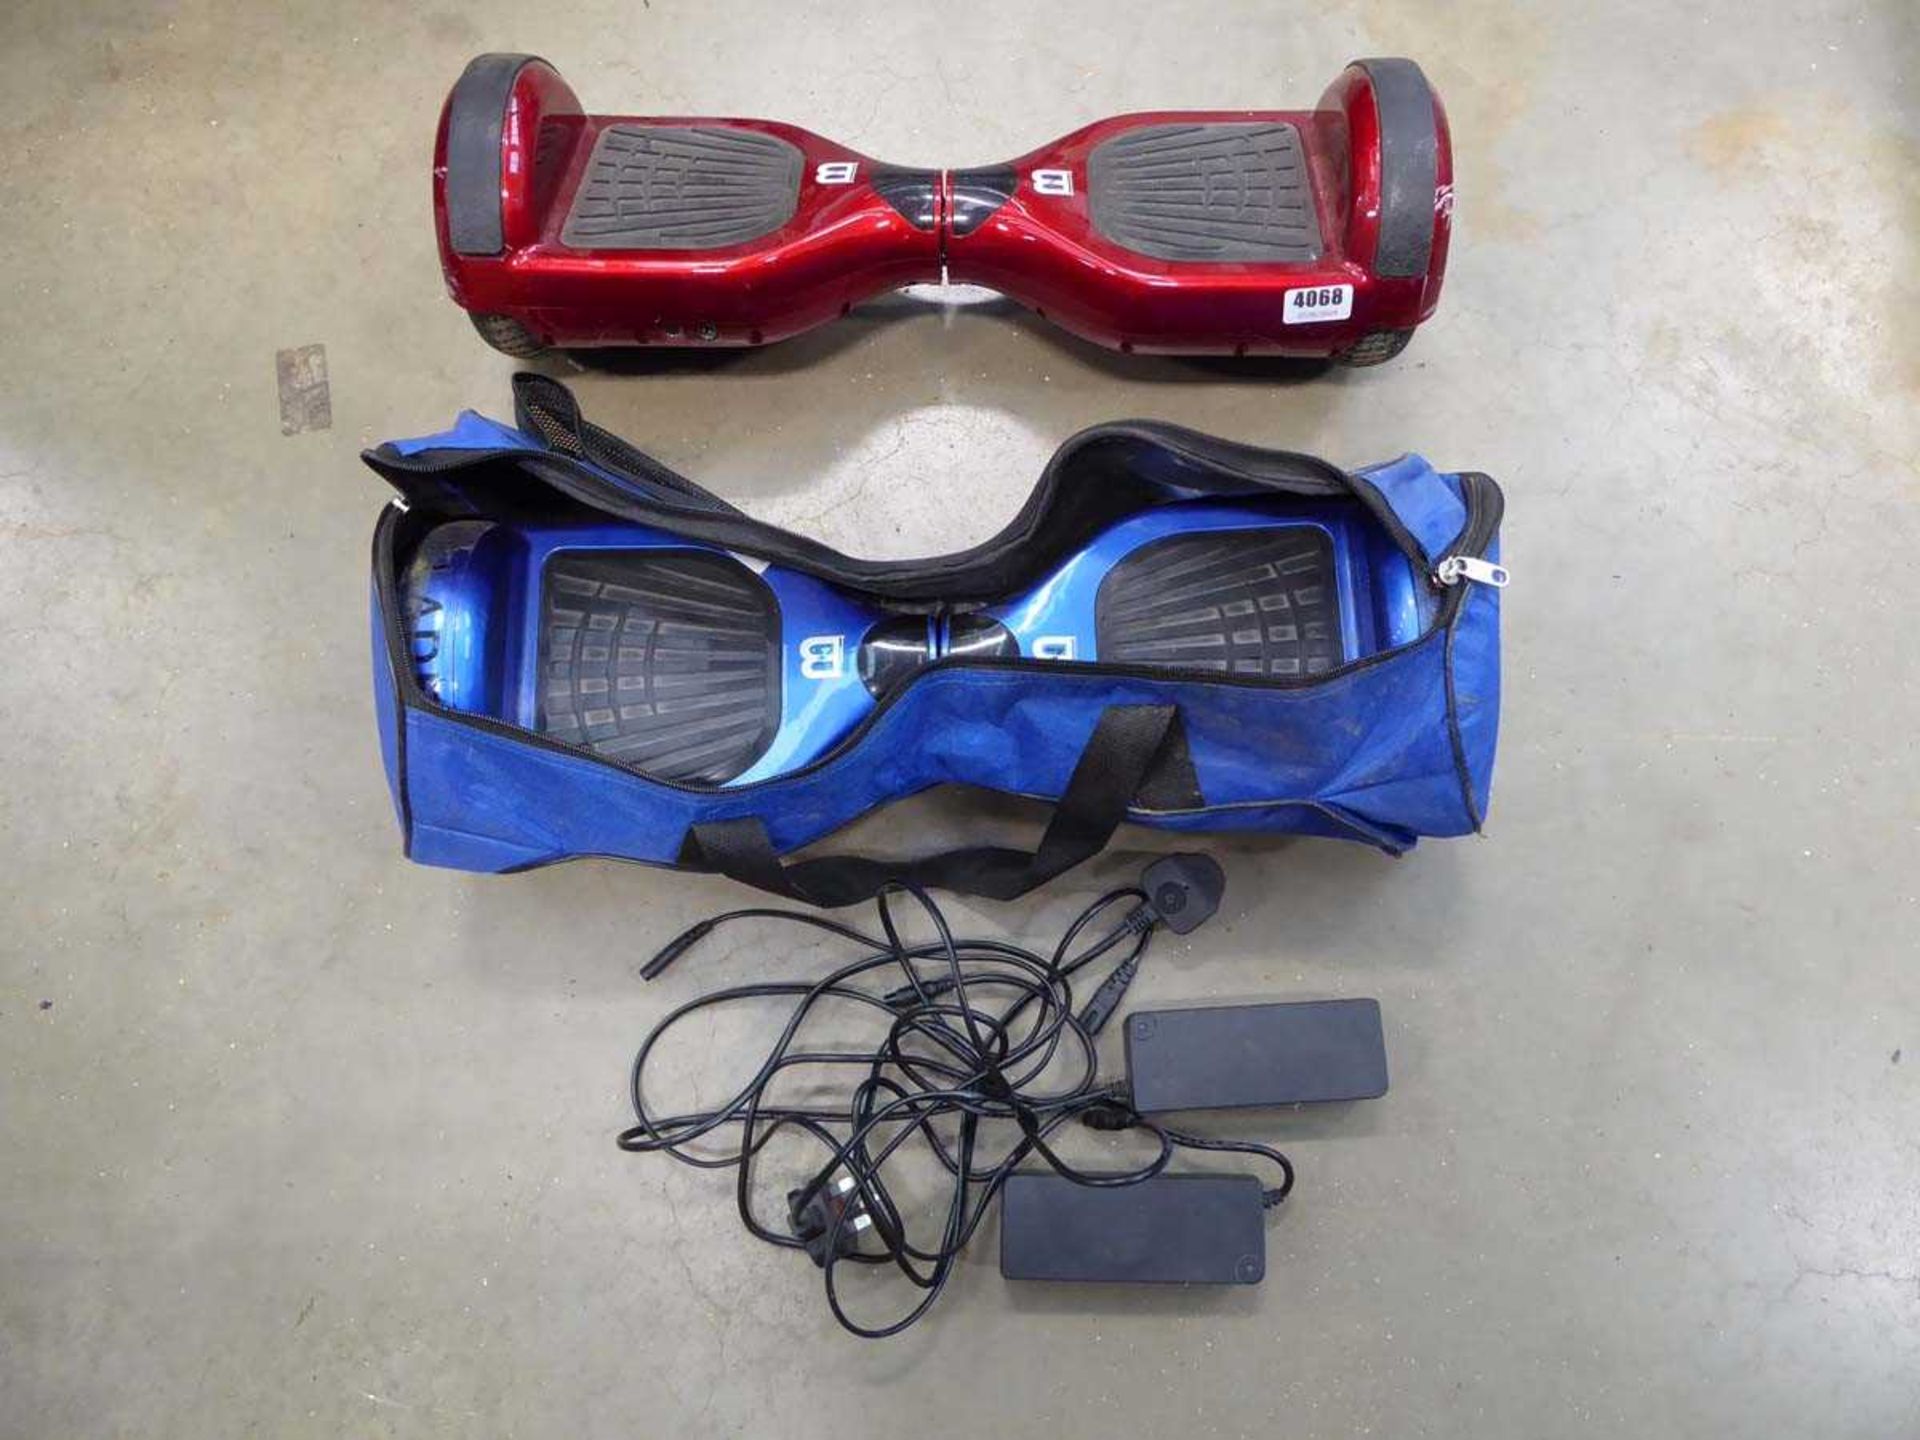 Two balance boards